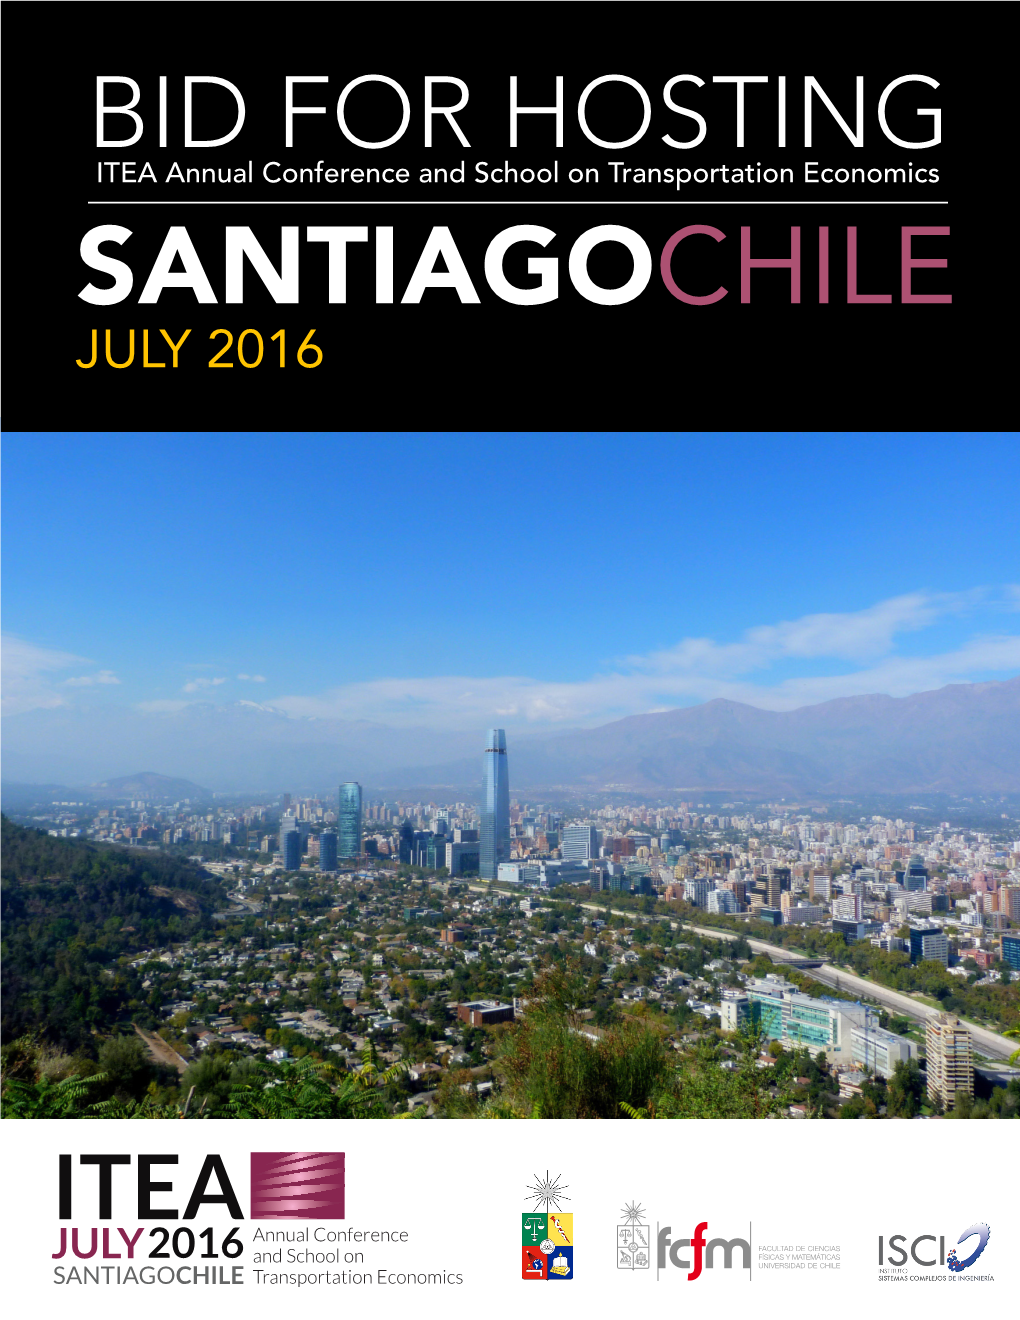 Santiagochile July 2016 Table of Contents